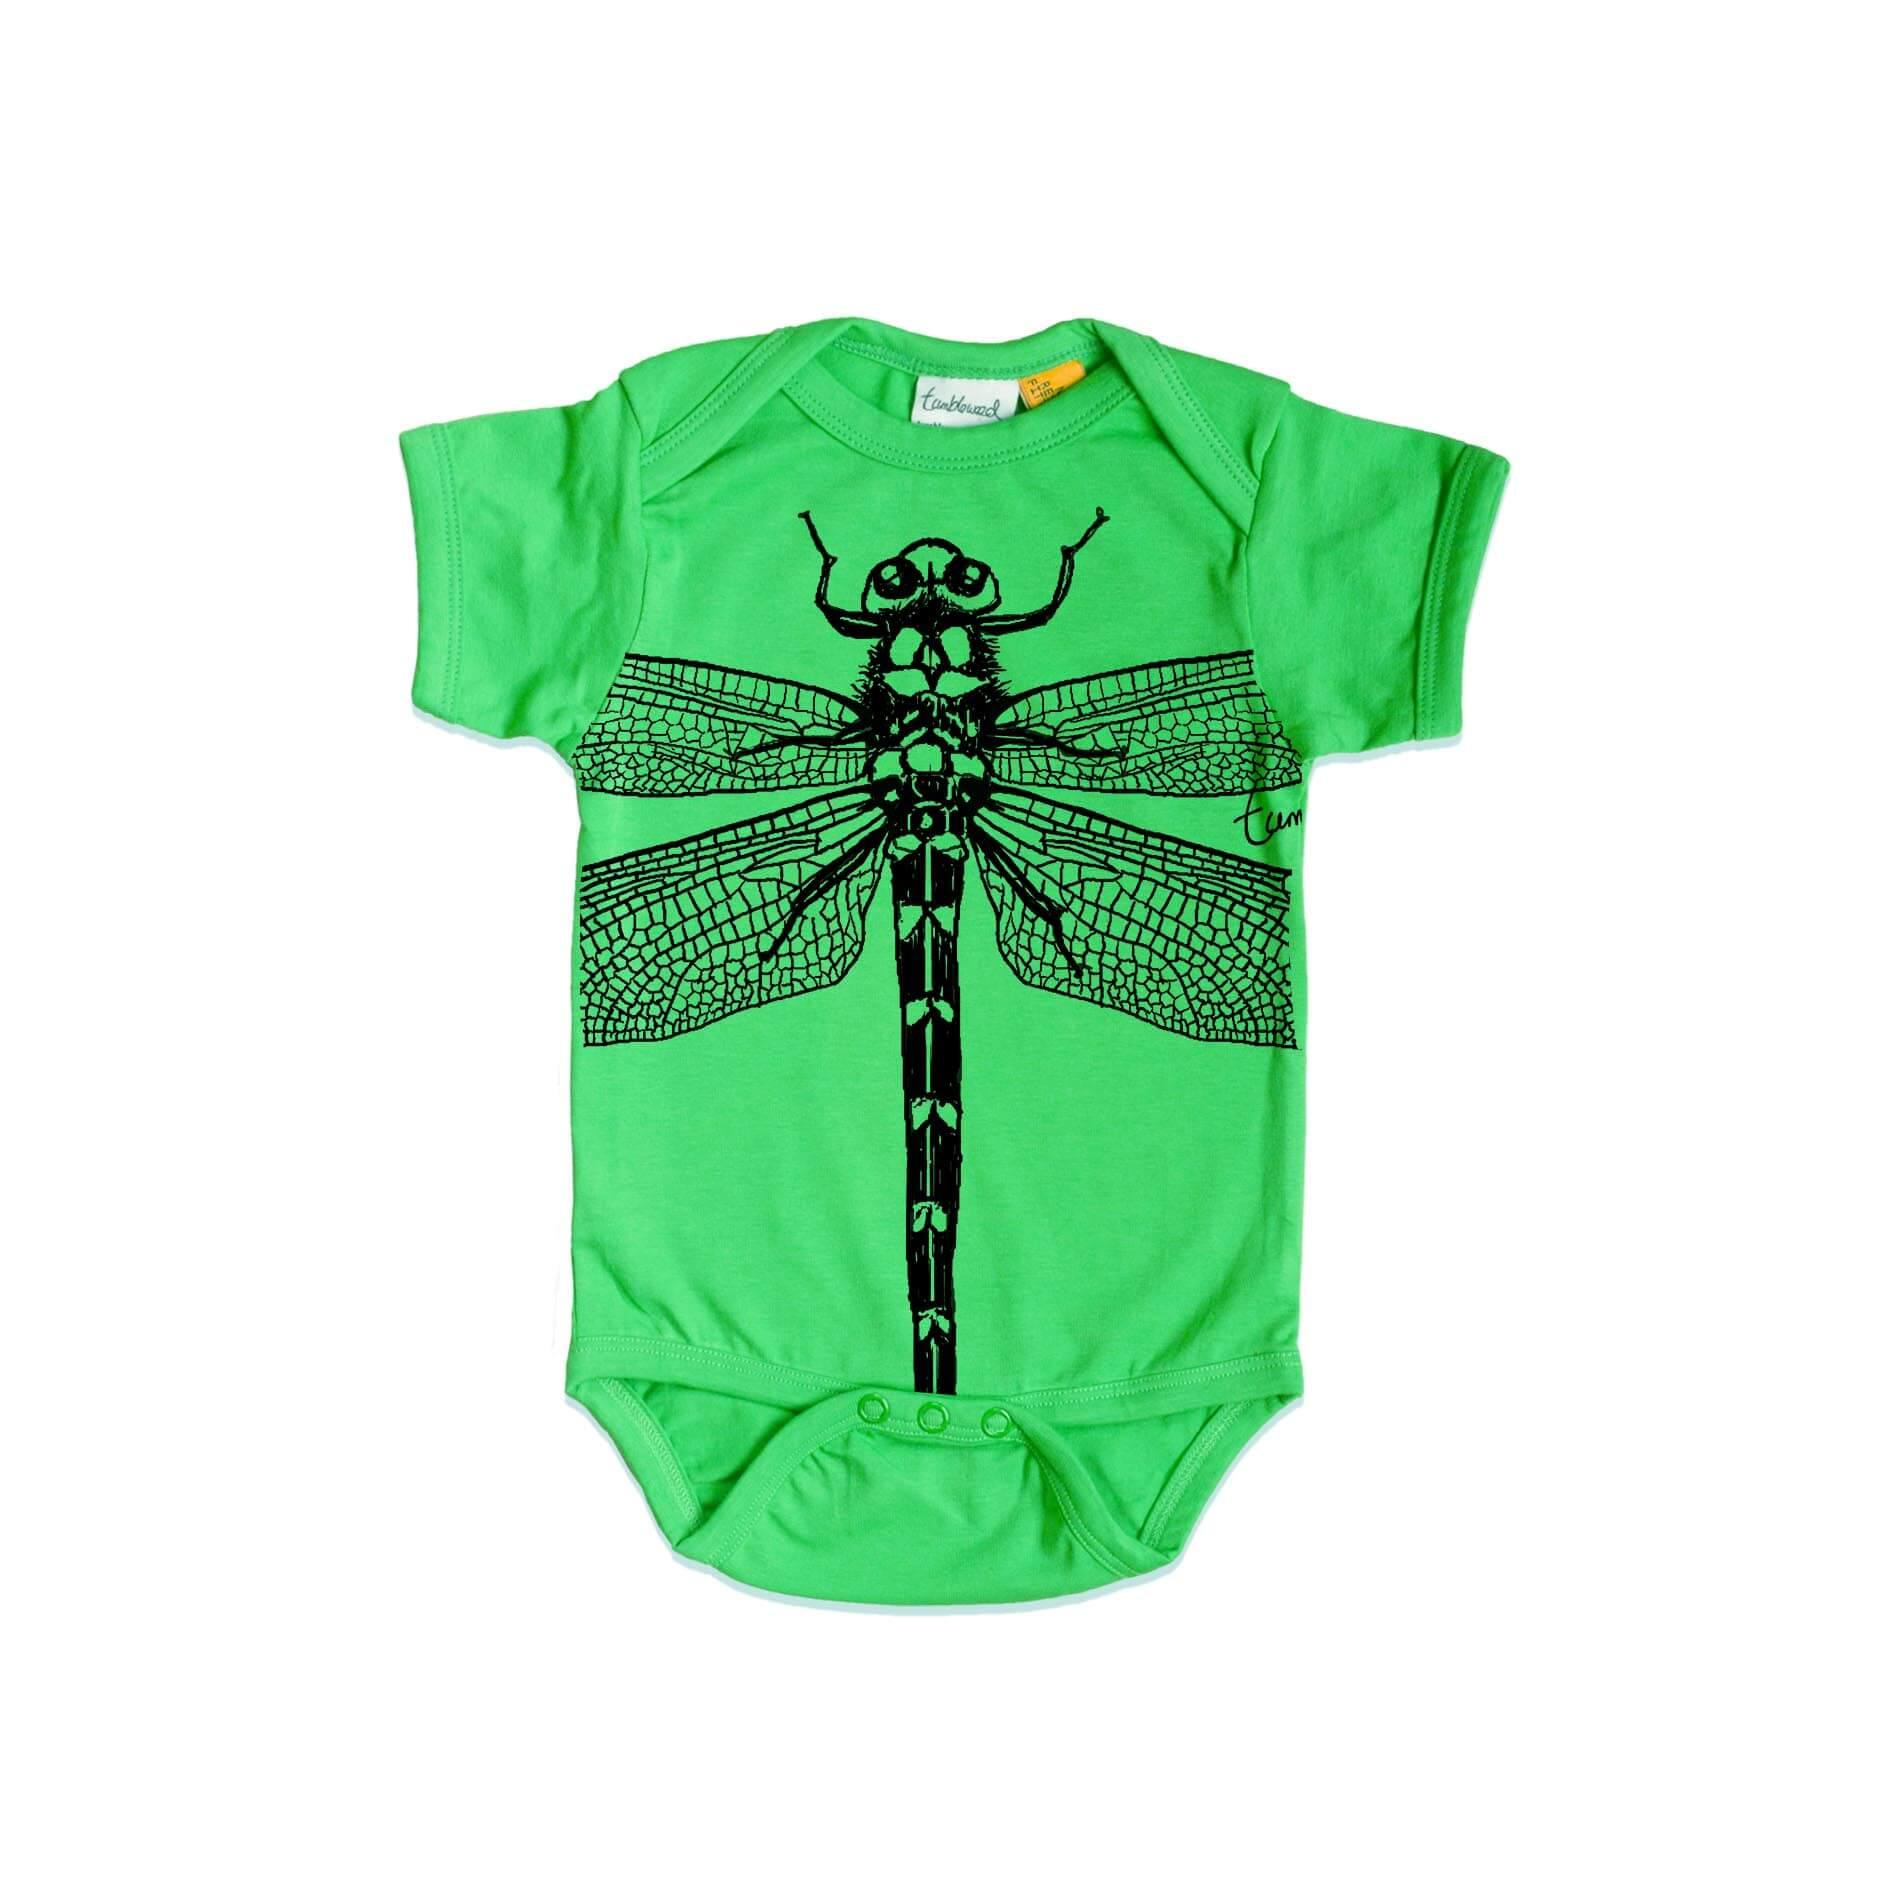 Short sleeved, green, organic cotton, baby onesie featuring a screen printed Dragonfly design.
 design.